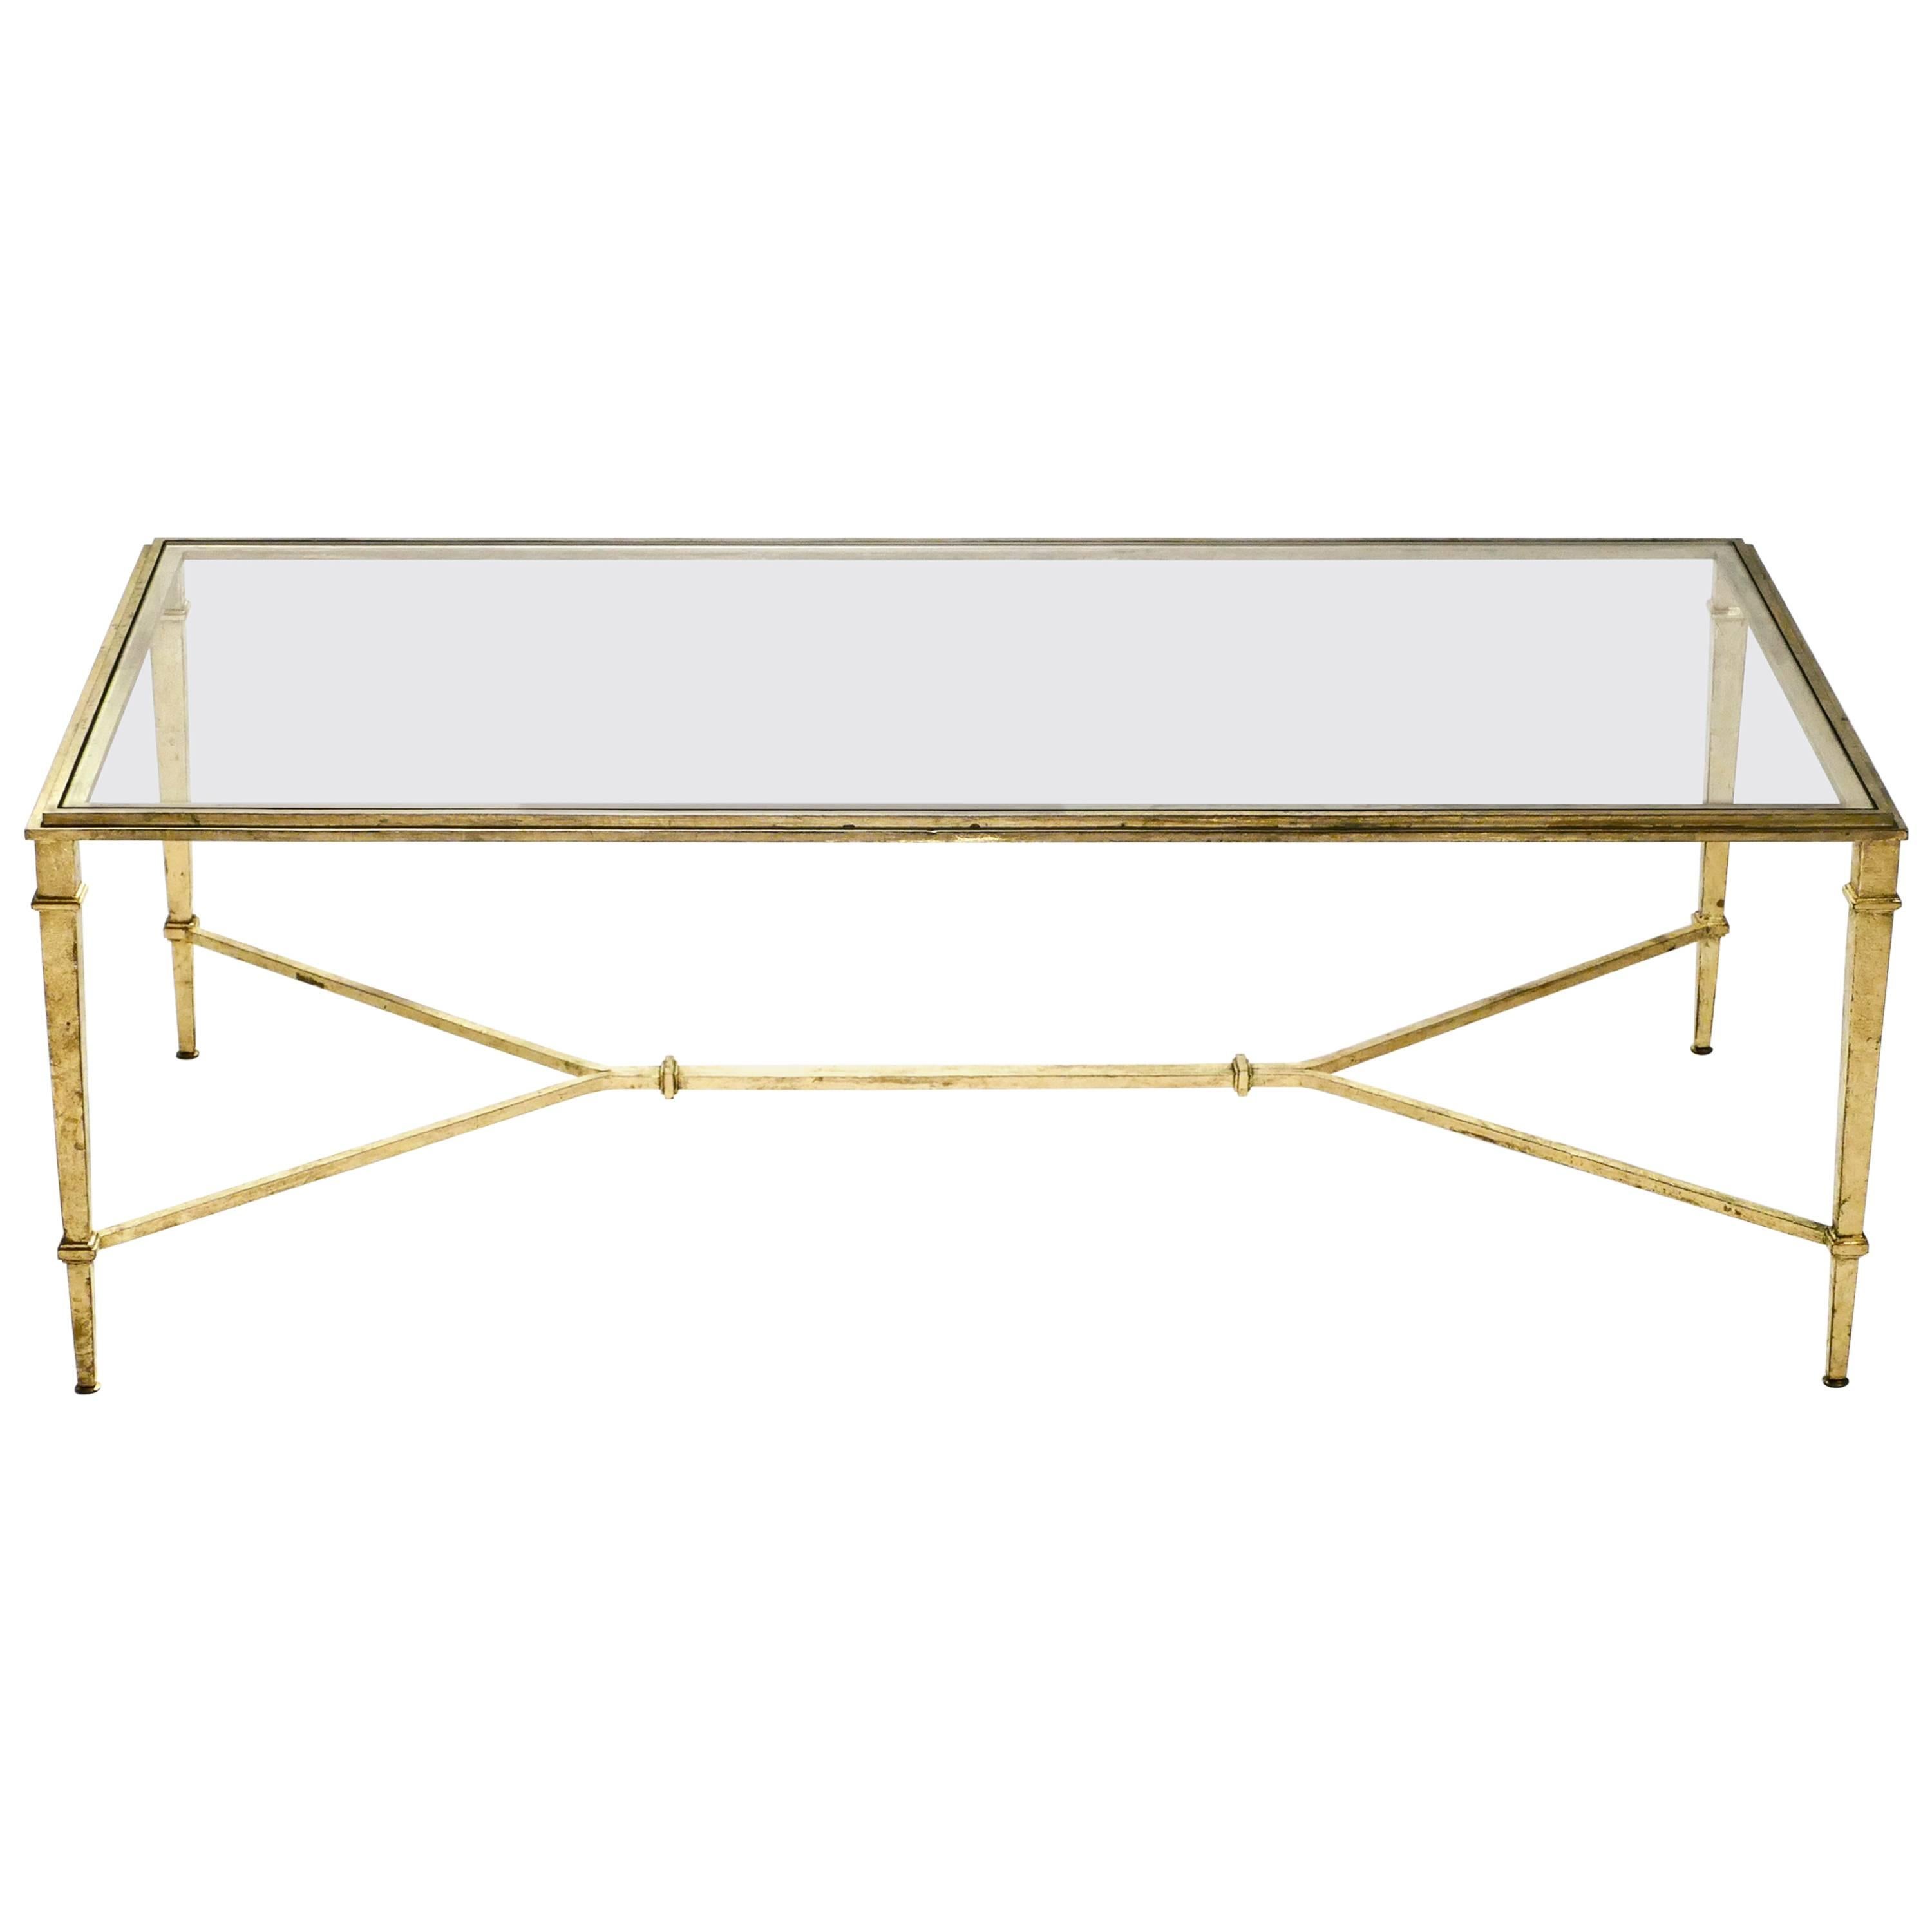 Robert Thibier Gilt Wrought Iron Coffee Table, 1960s